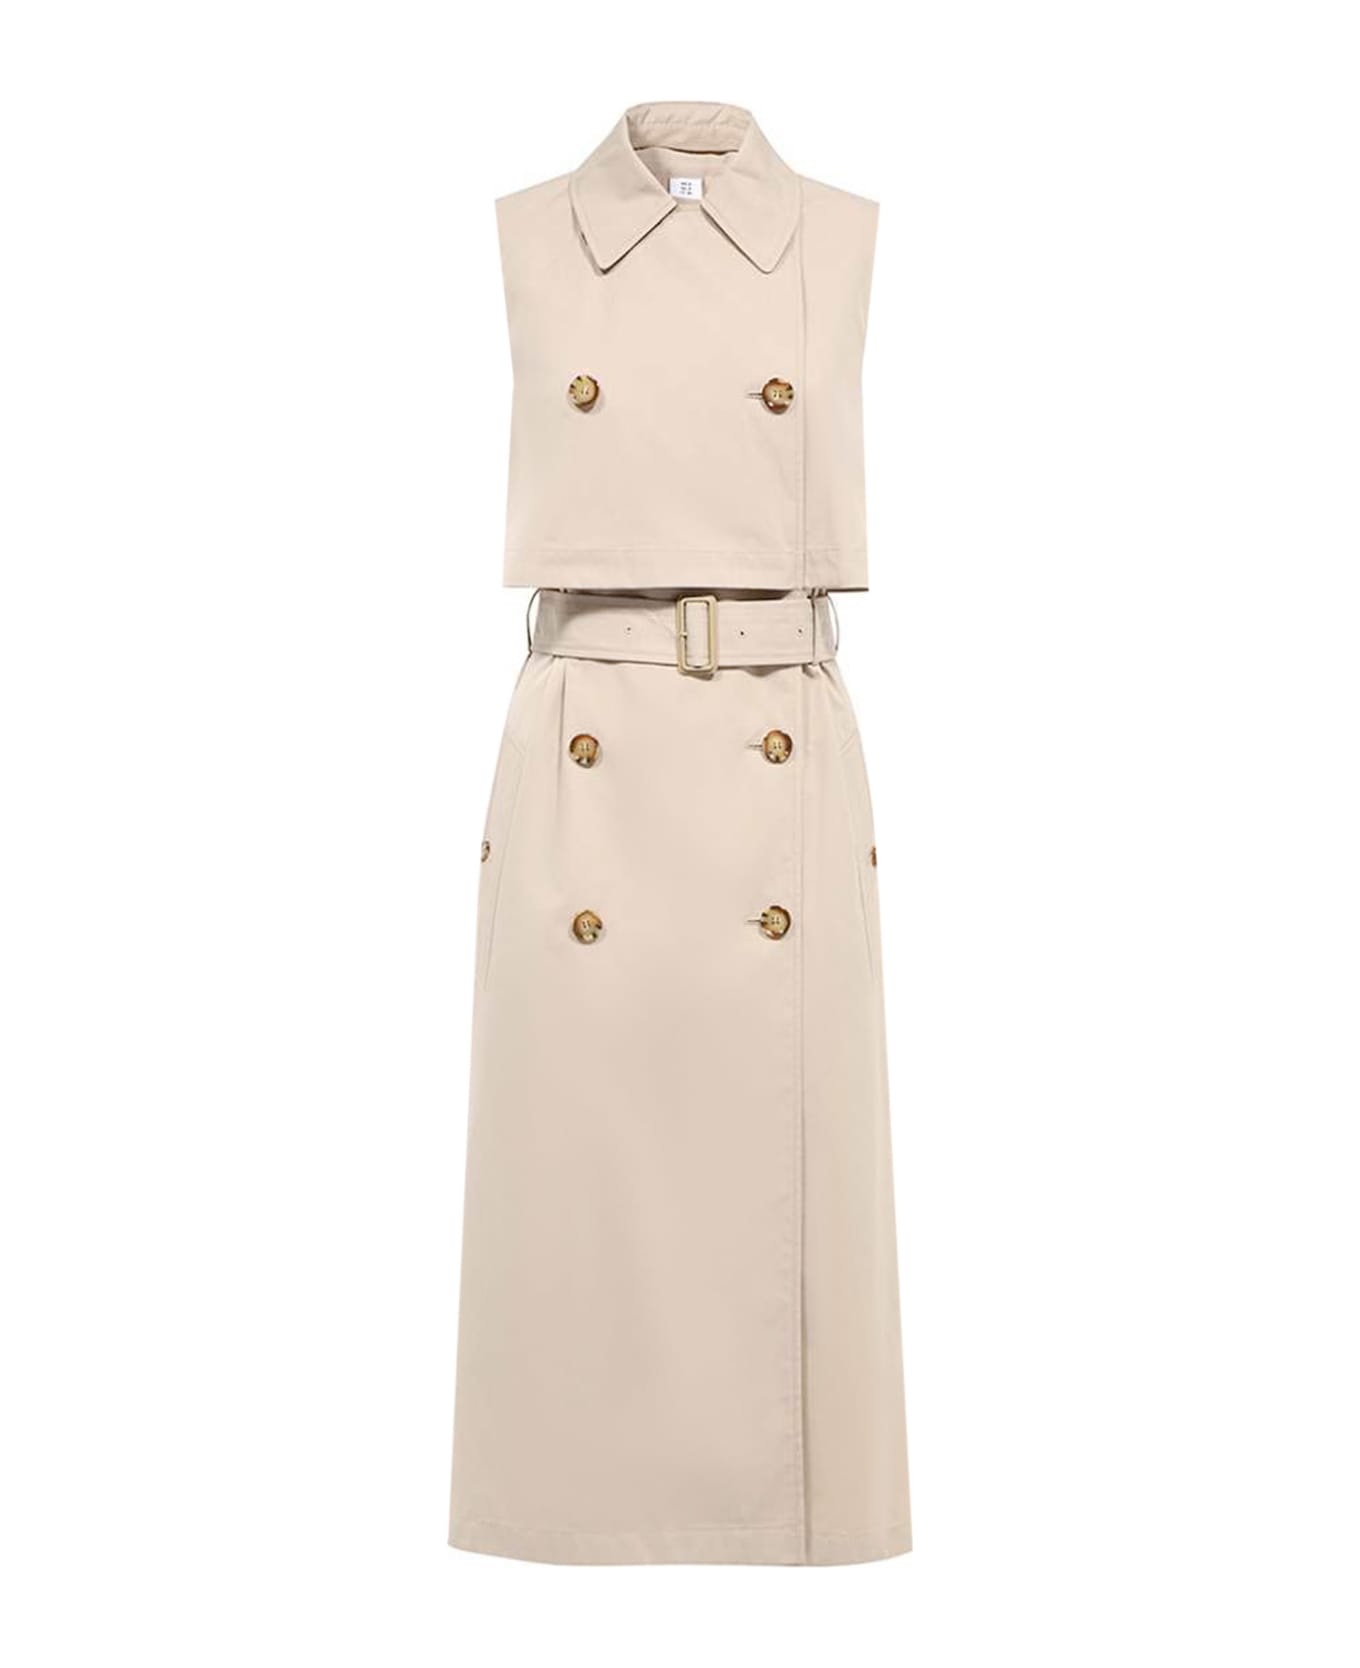 Burberry Trench - Beige